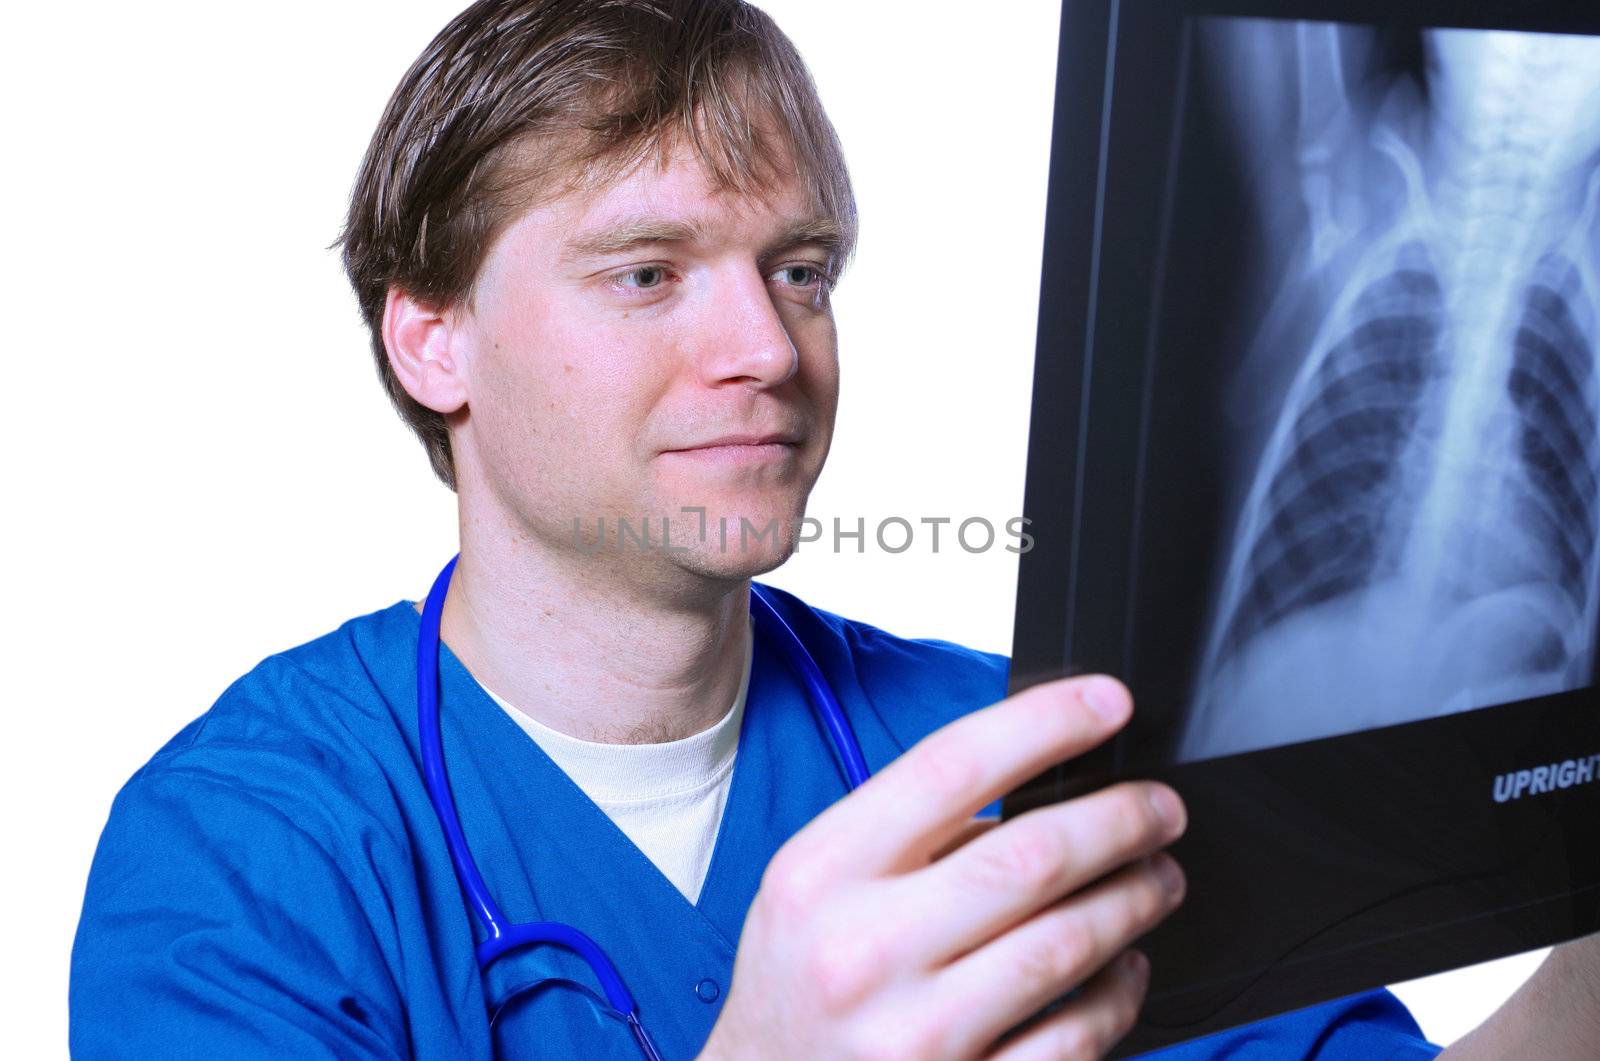 Male doctor looking at xray by jarenwicklund